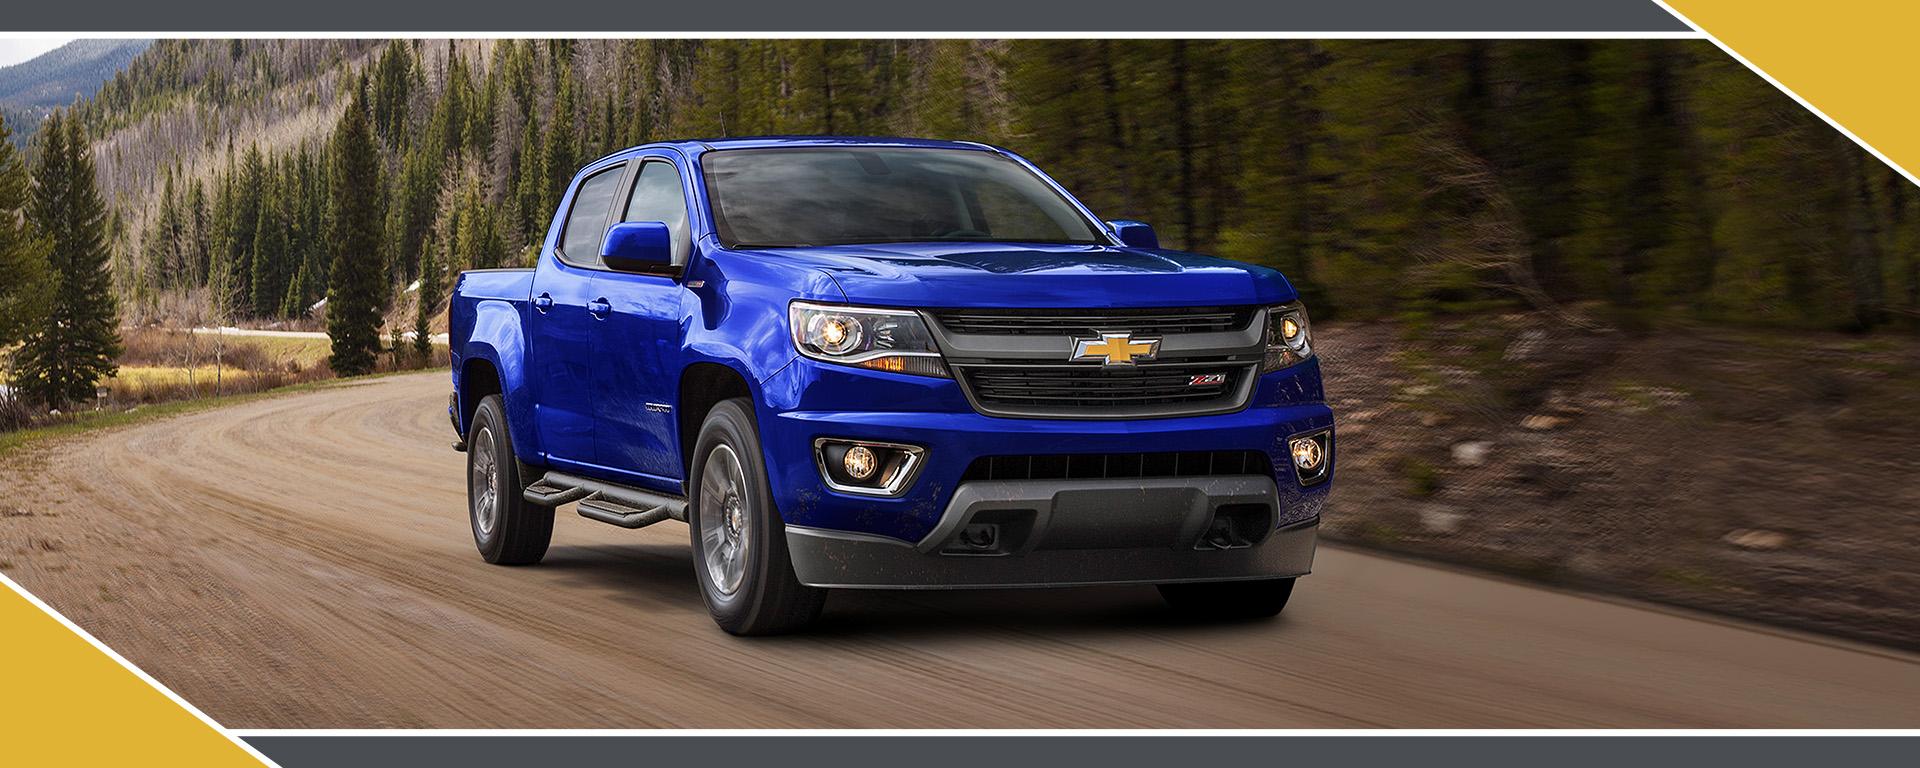 Used Chevy Colorado For Sale Milford OH